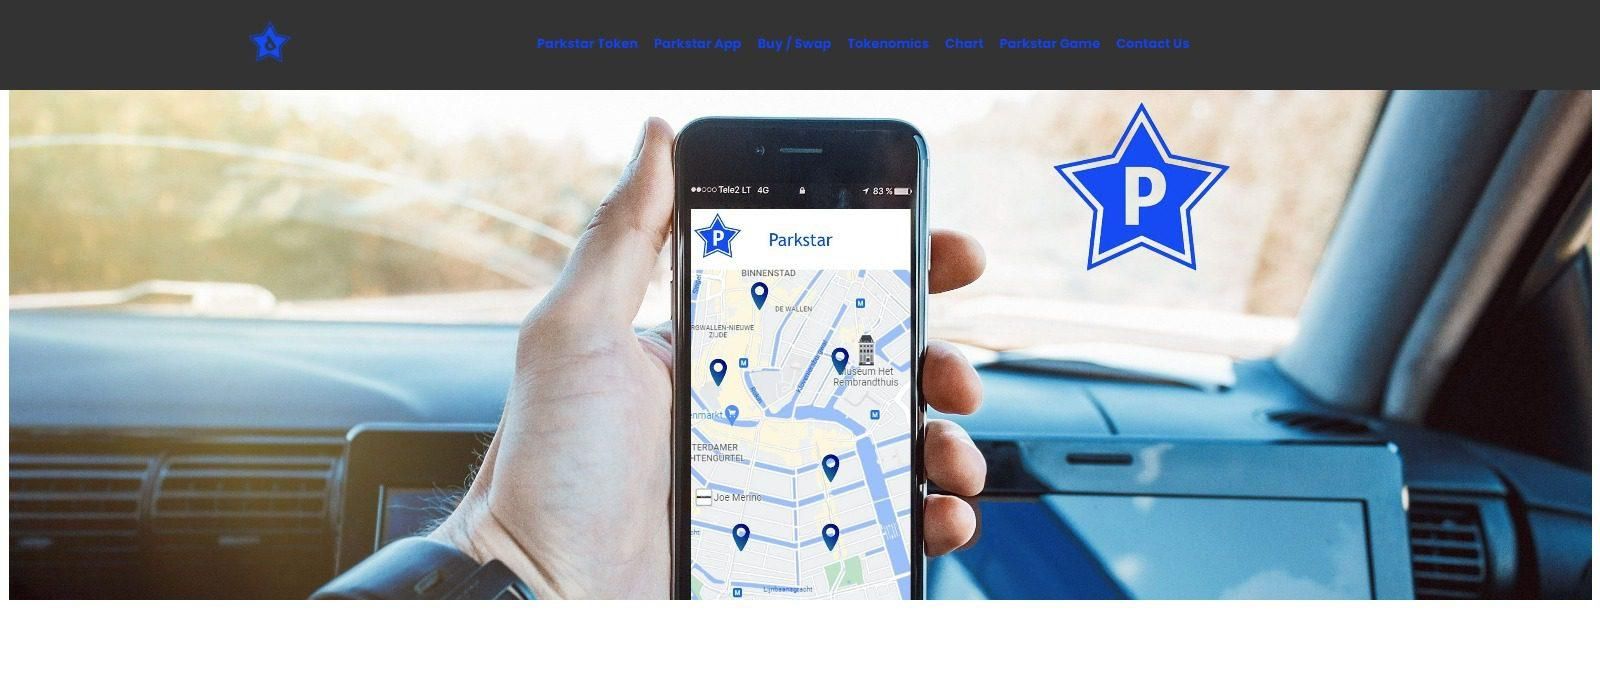 What Is Park Star(PSTAR)? Complete Guide & Review About Park Star